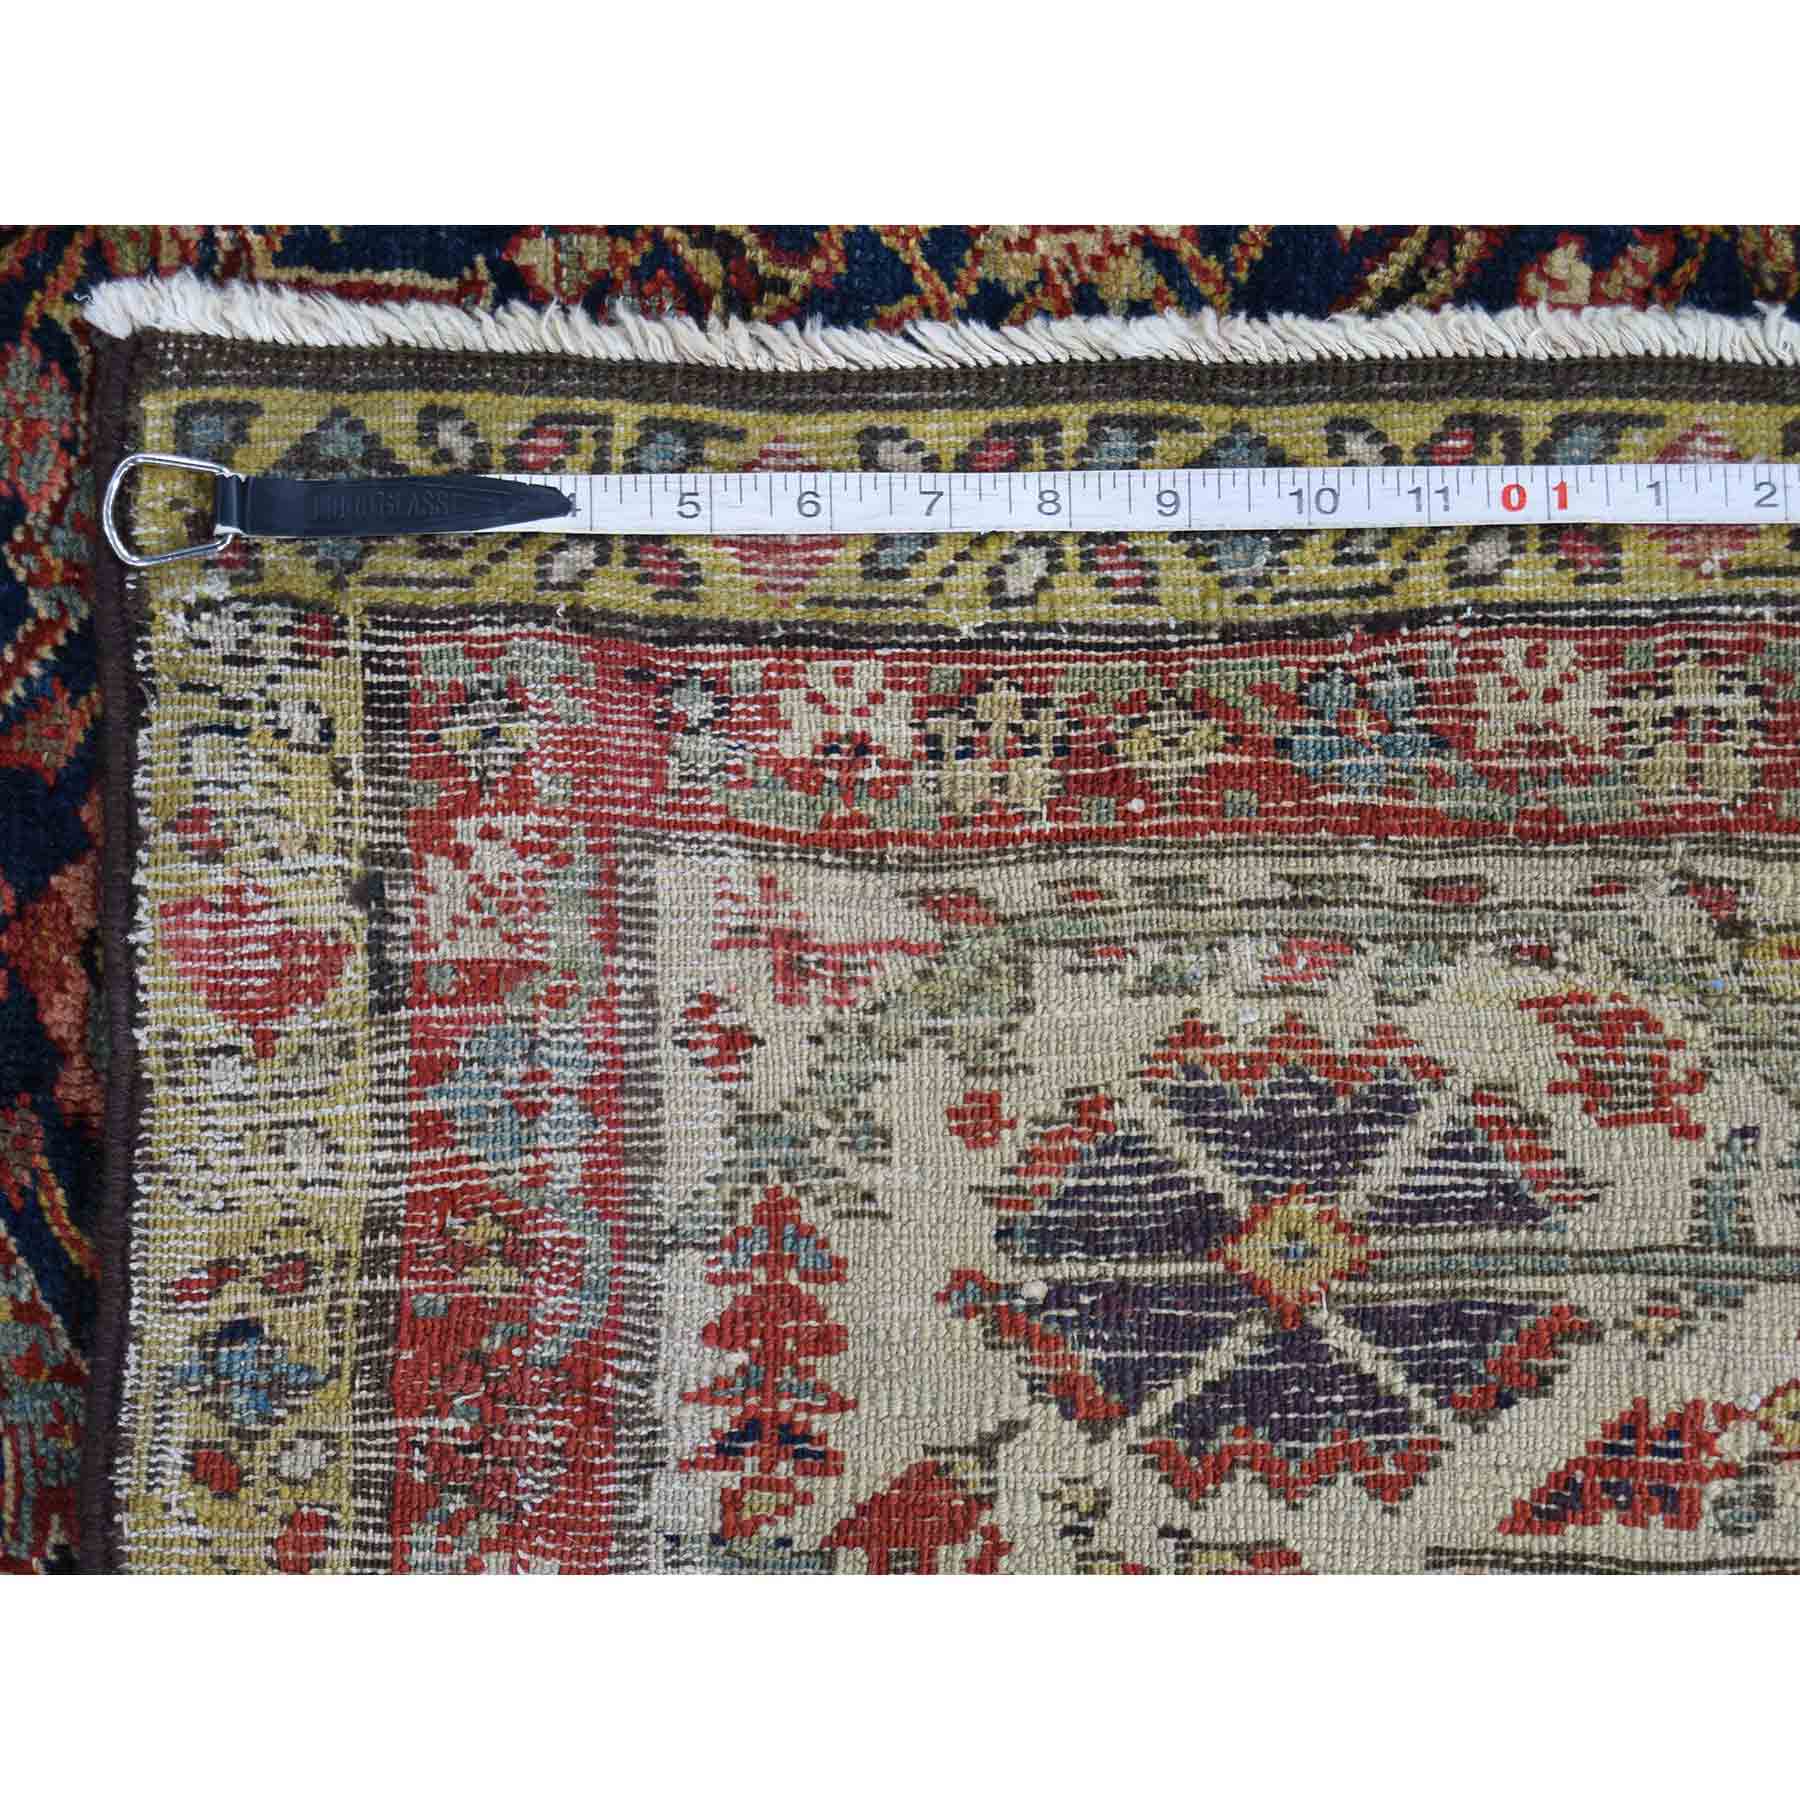 Antique-Hand-Knotted-Rug-214335